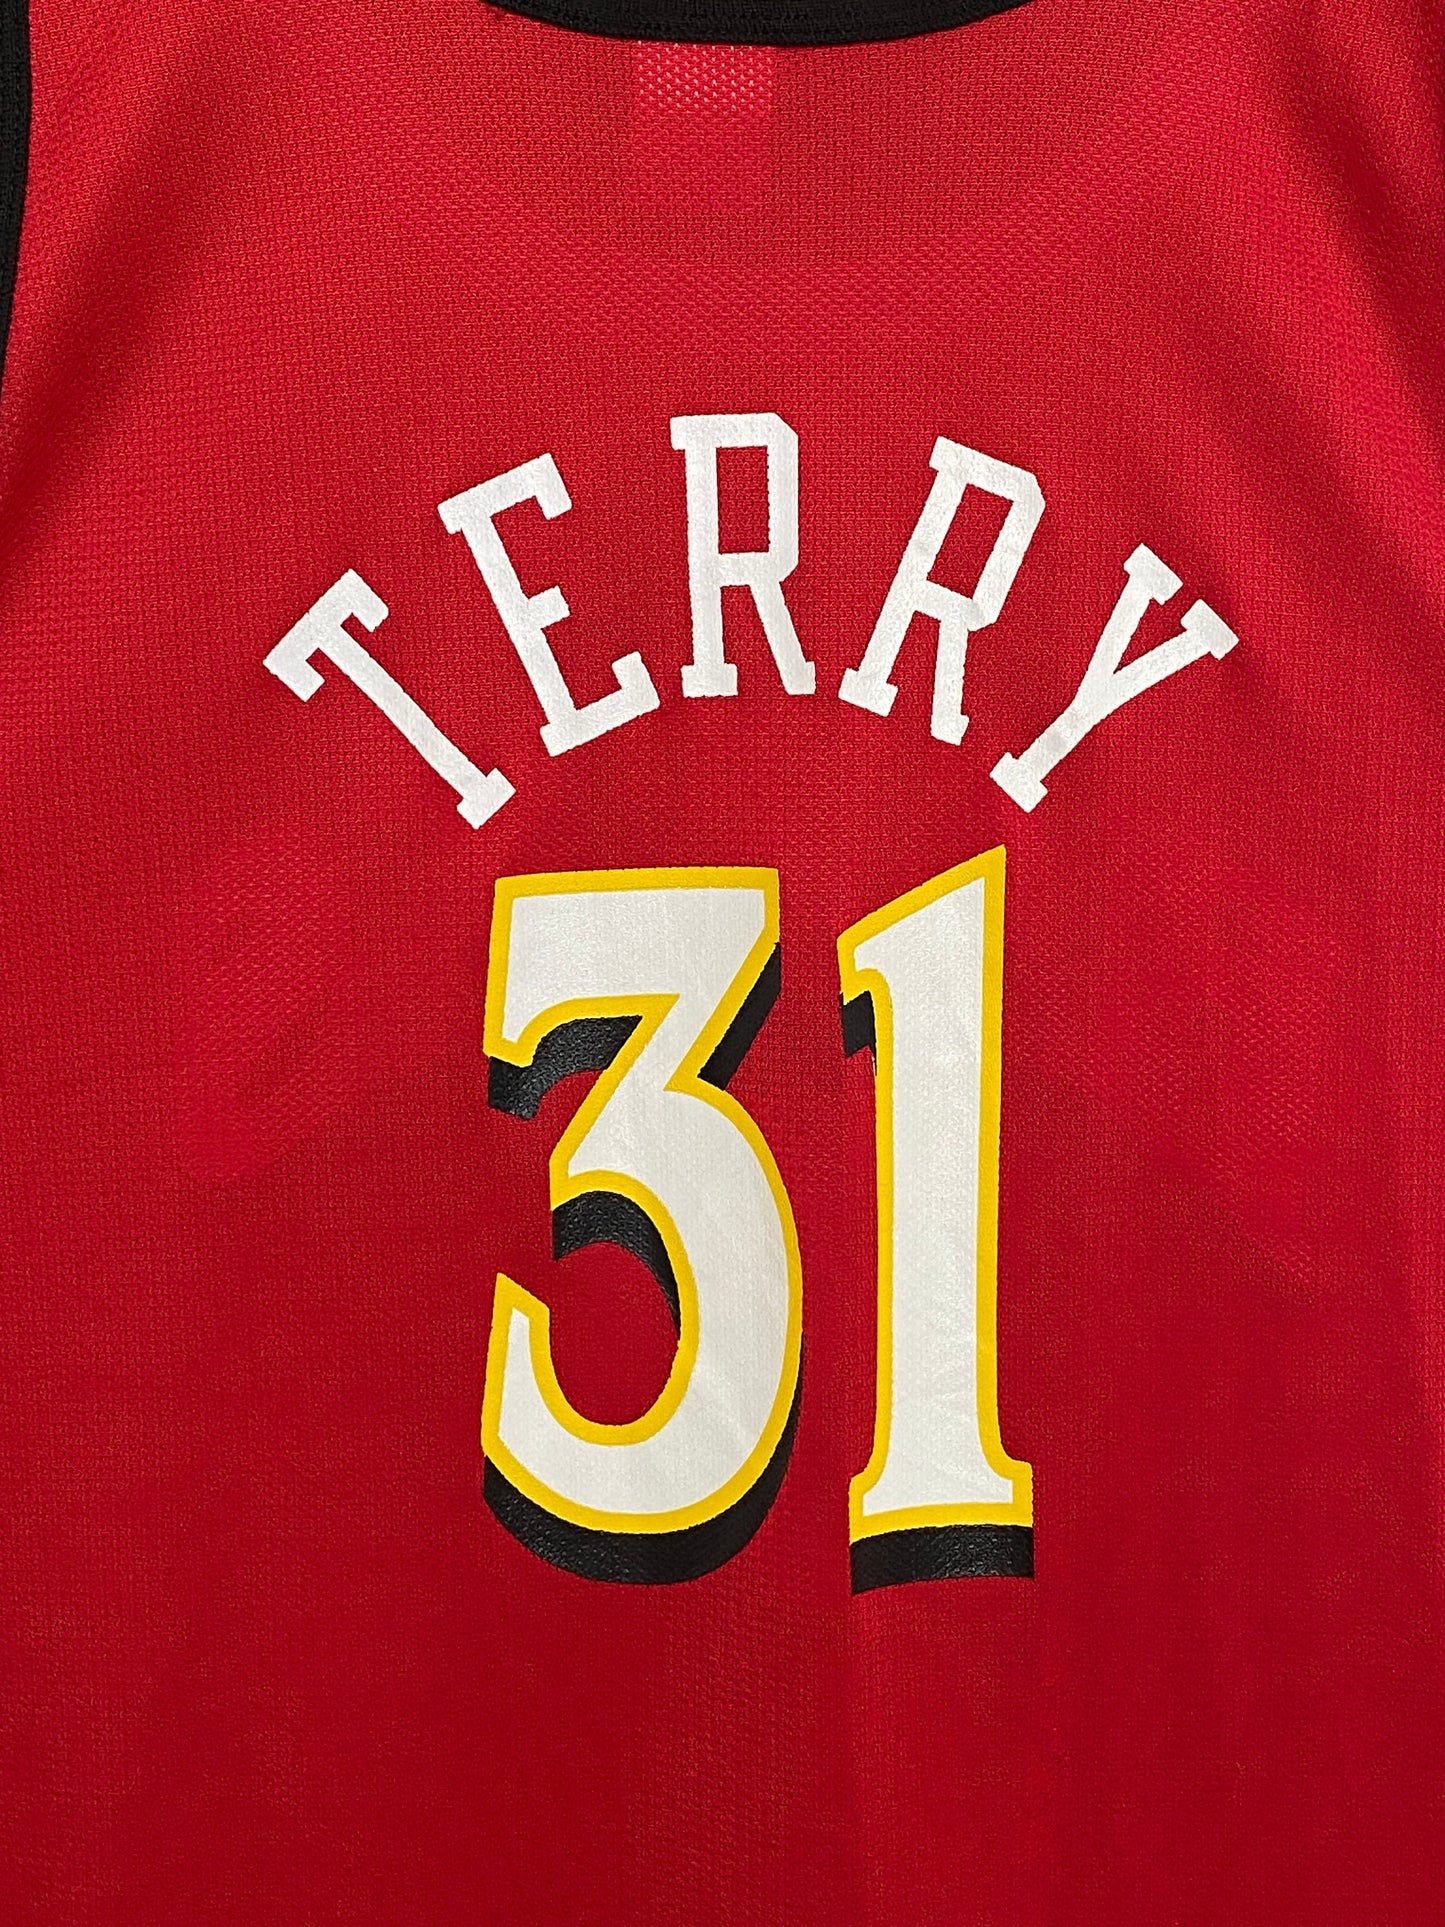 Vintage 90s Hawks Terry #31 NBA Jersey - Size 52 | Made by Champion